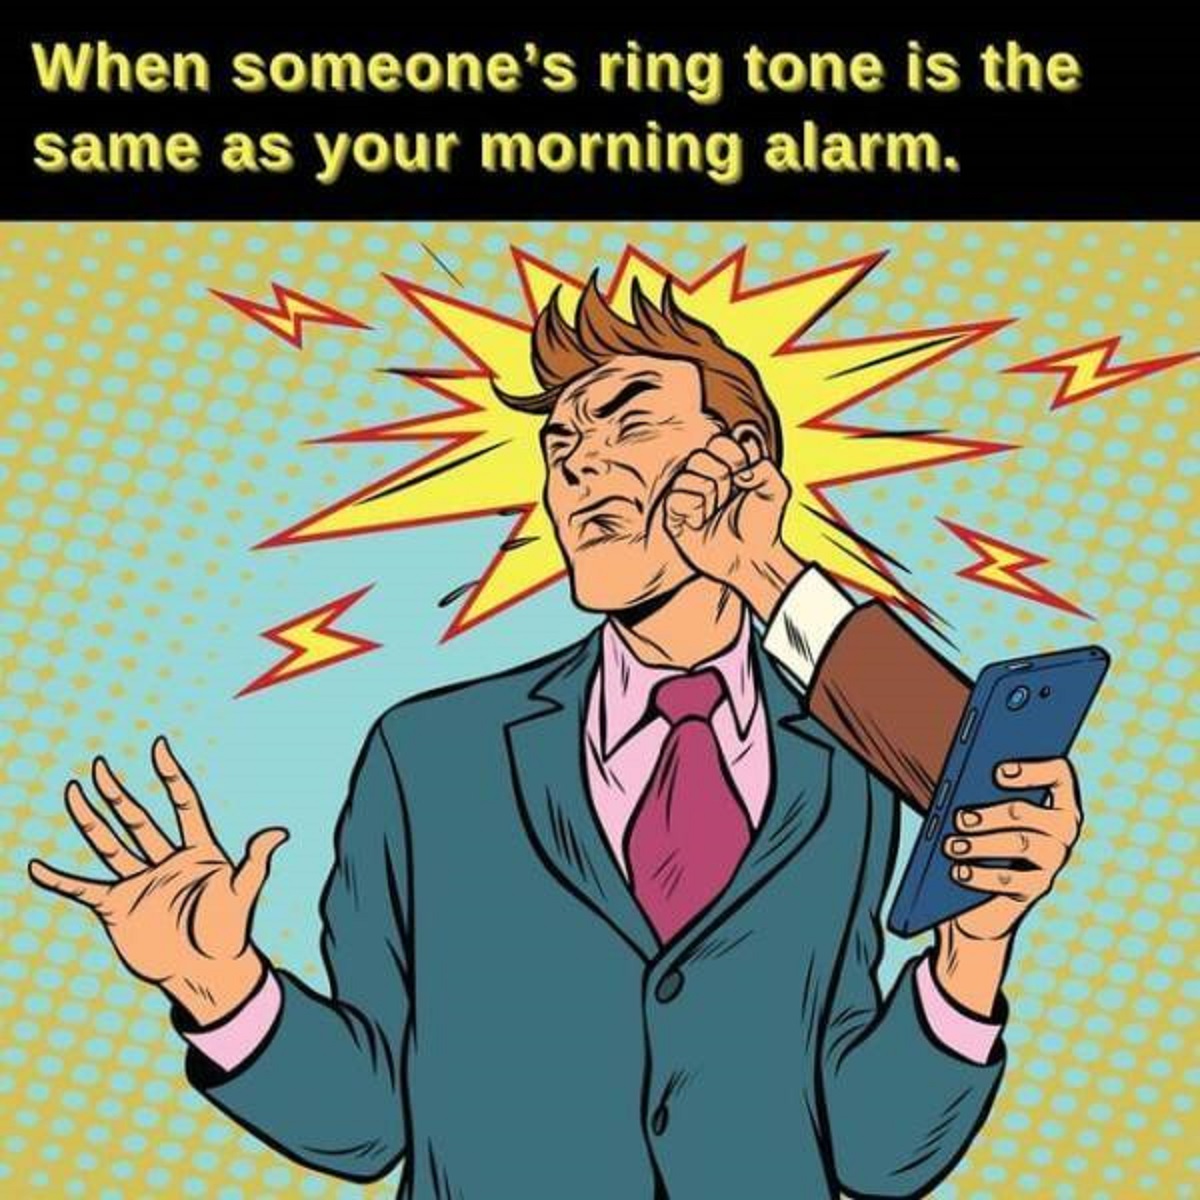 online slap - When someone's ring tone is the same as your morning alarm. Z